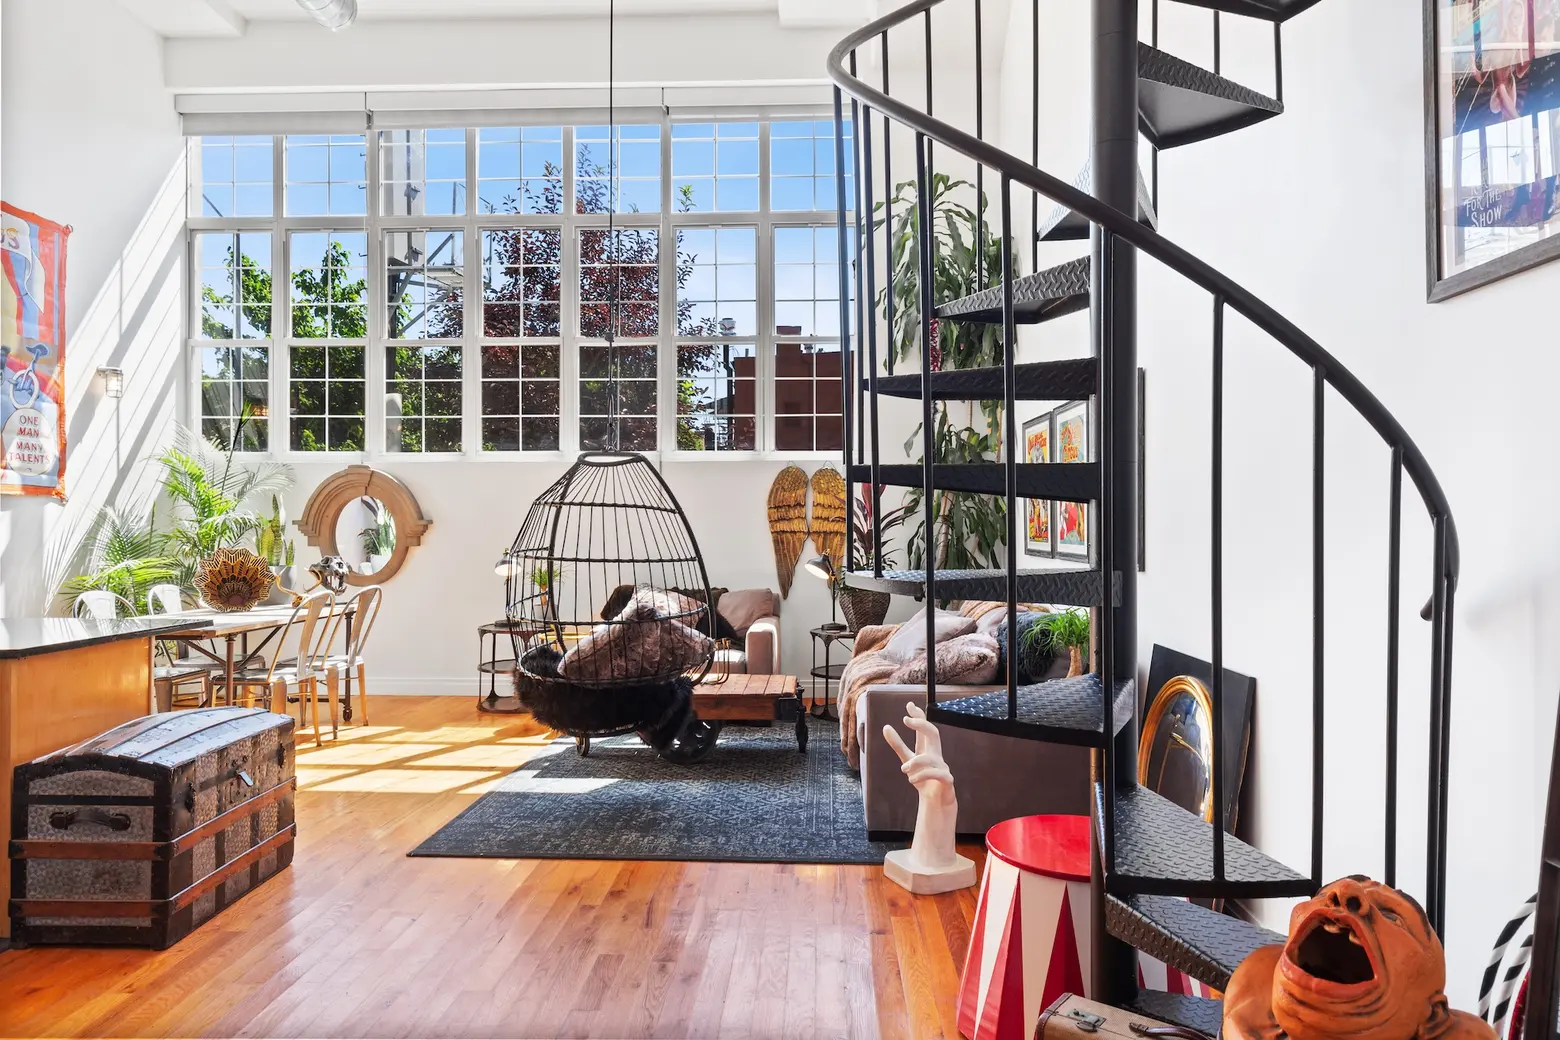 $1M Bed-Stuy loft got some circus-worthy touches from its aerialist owner